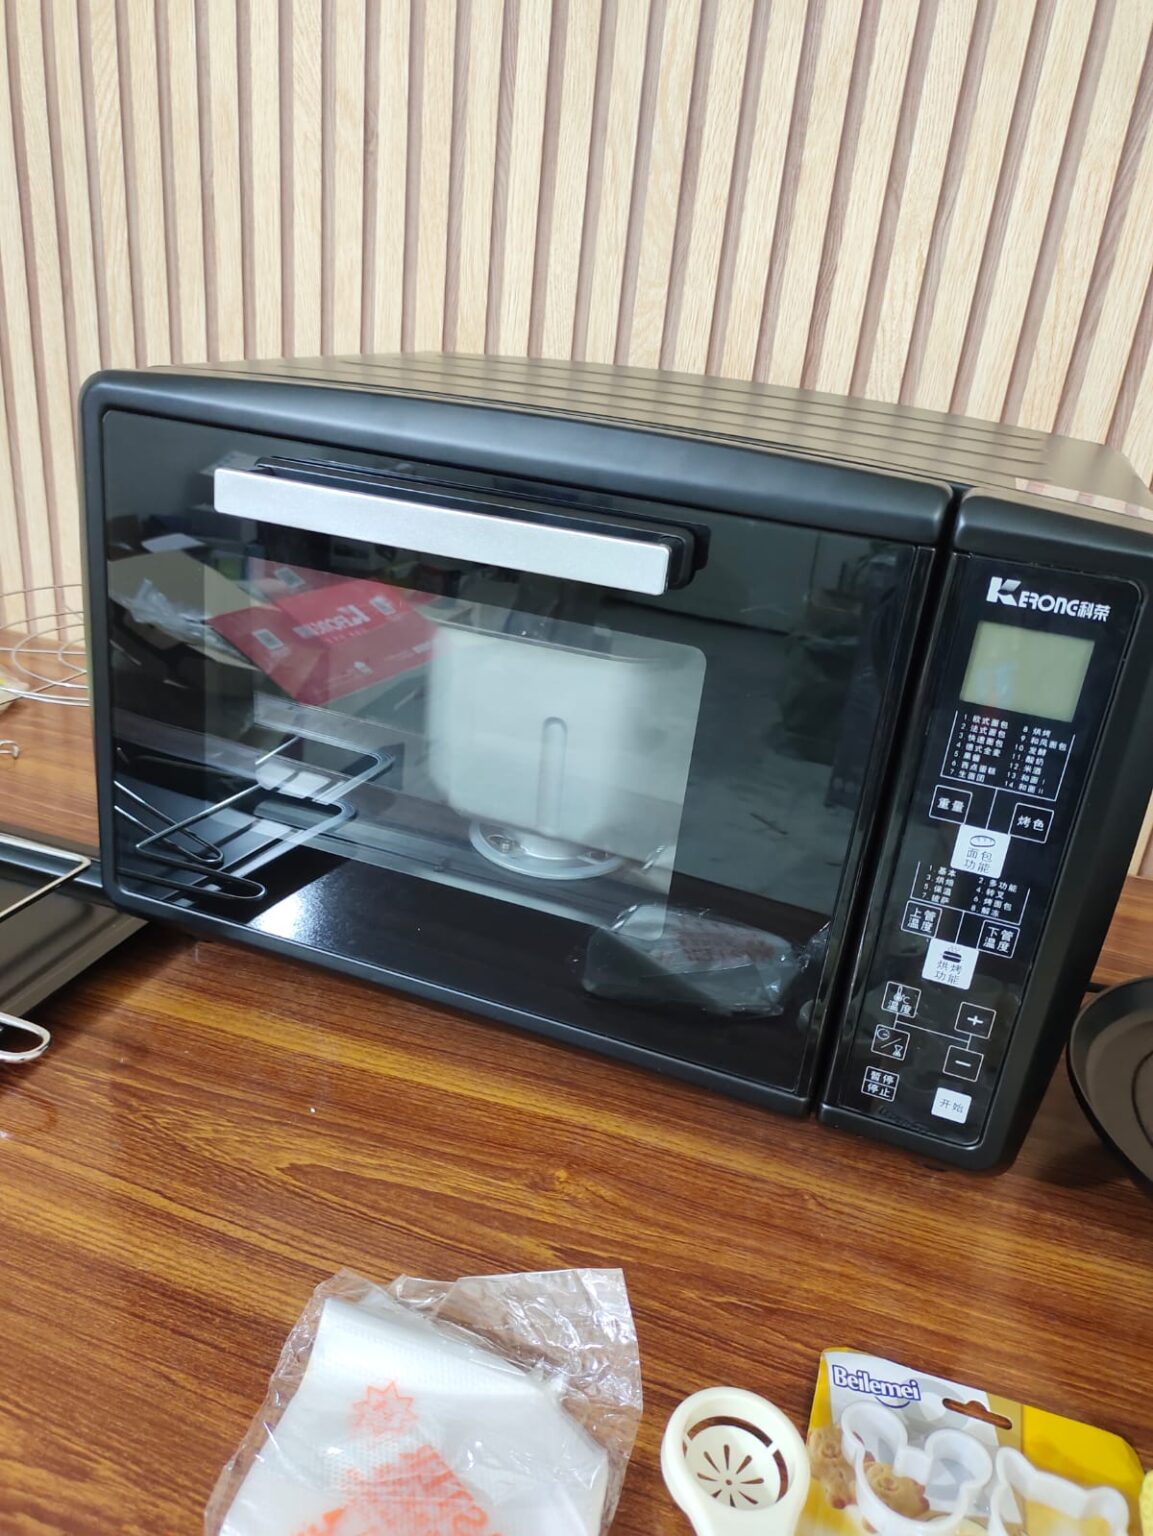 43L Multifunction Electric Oven & Bread Maker